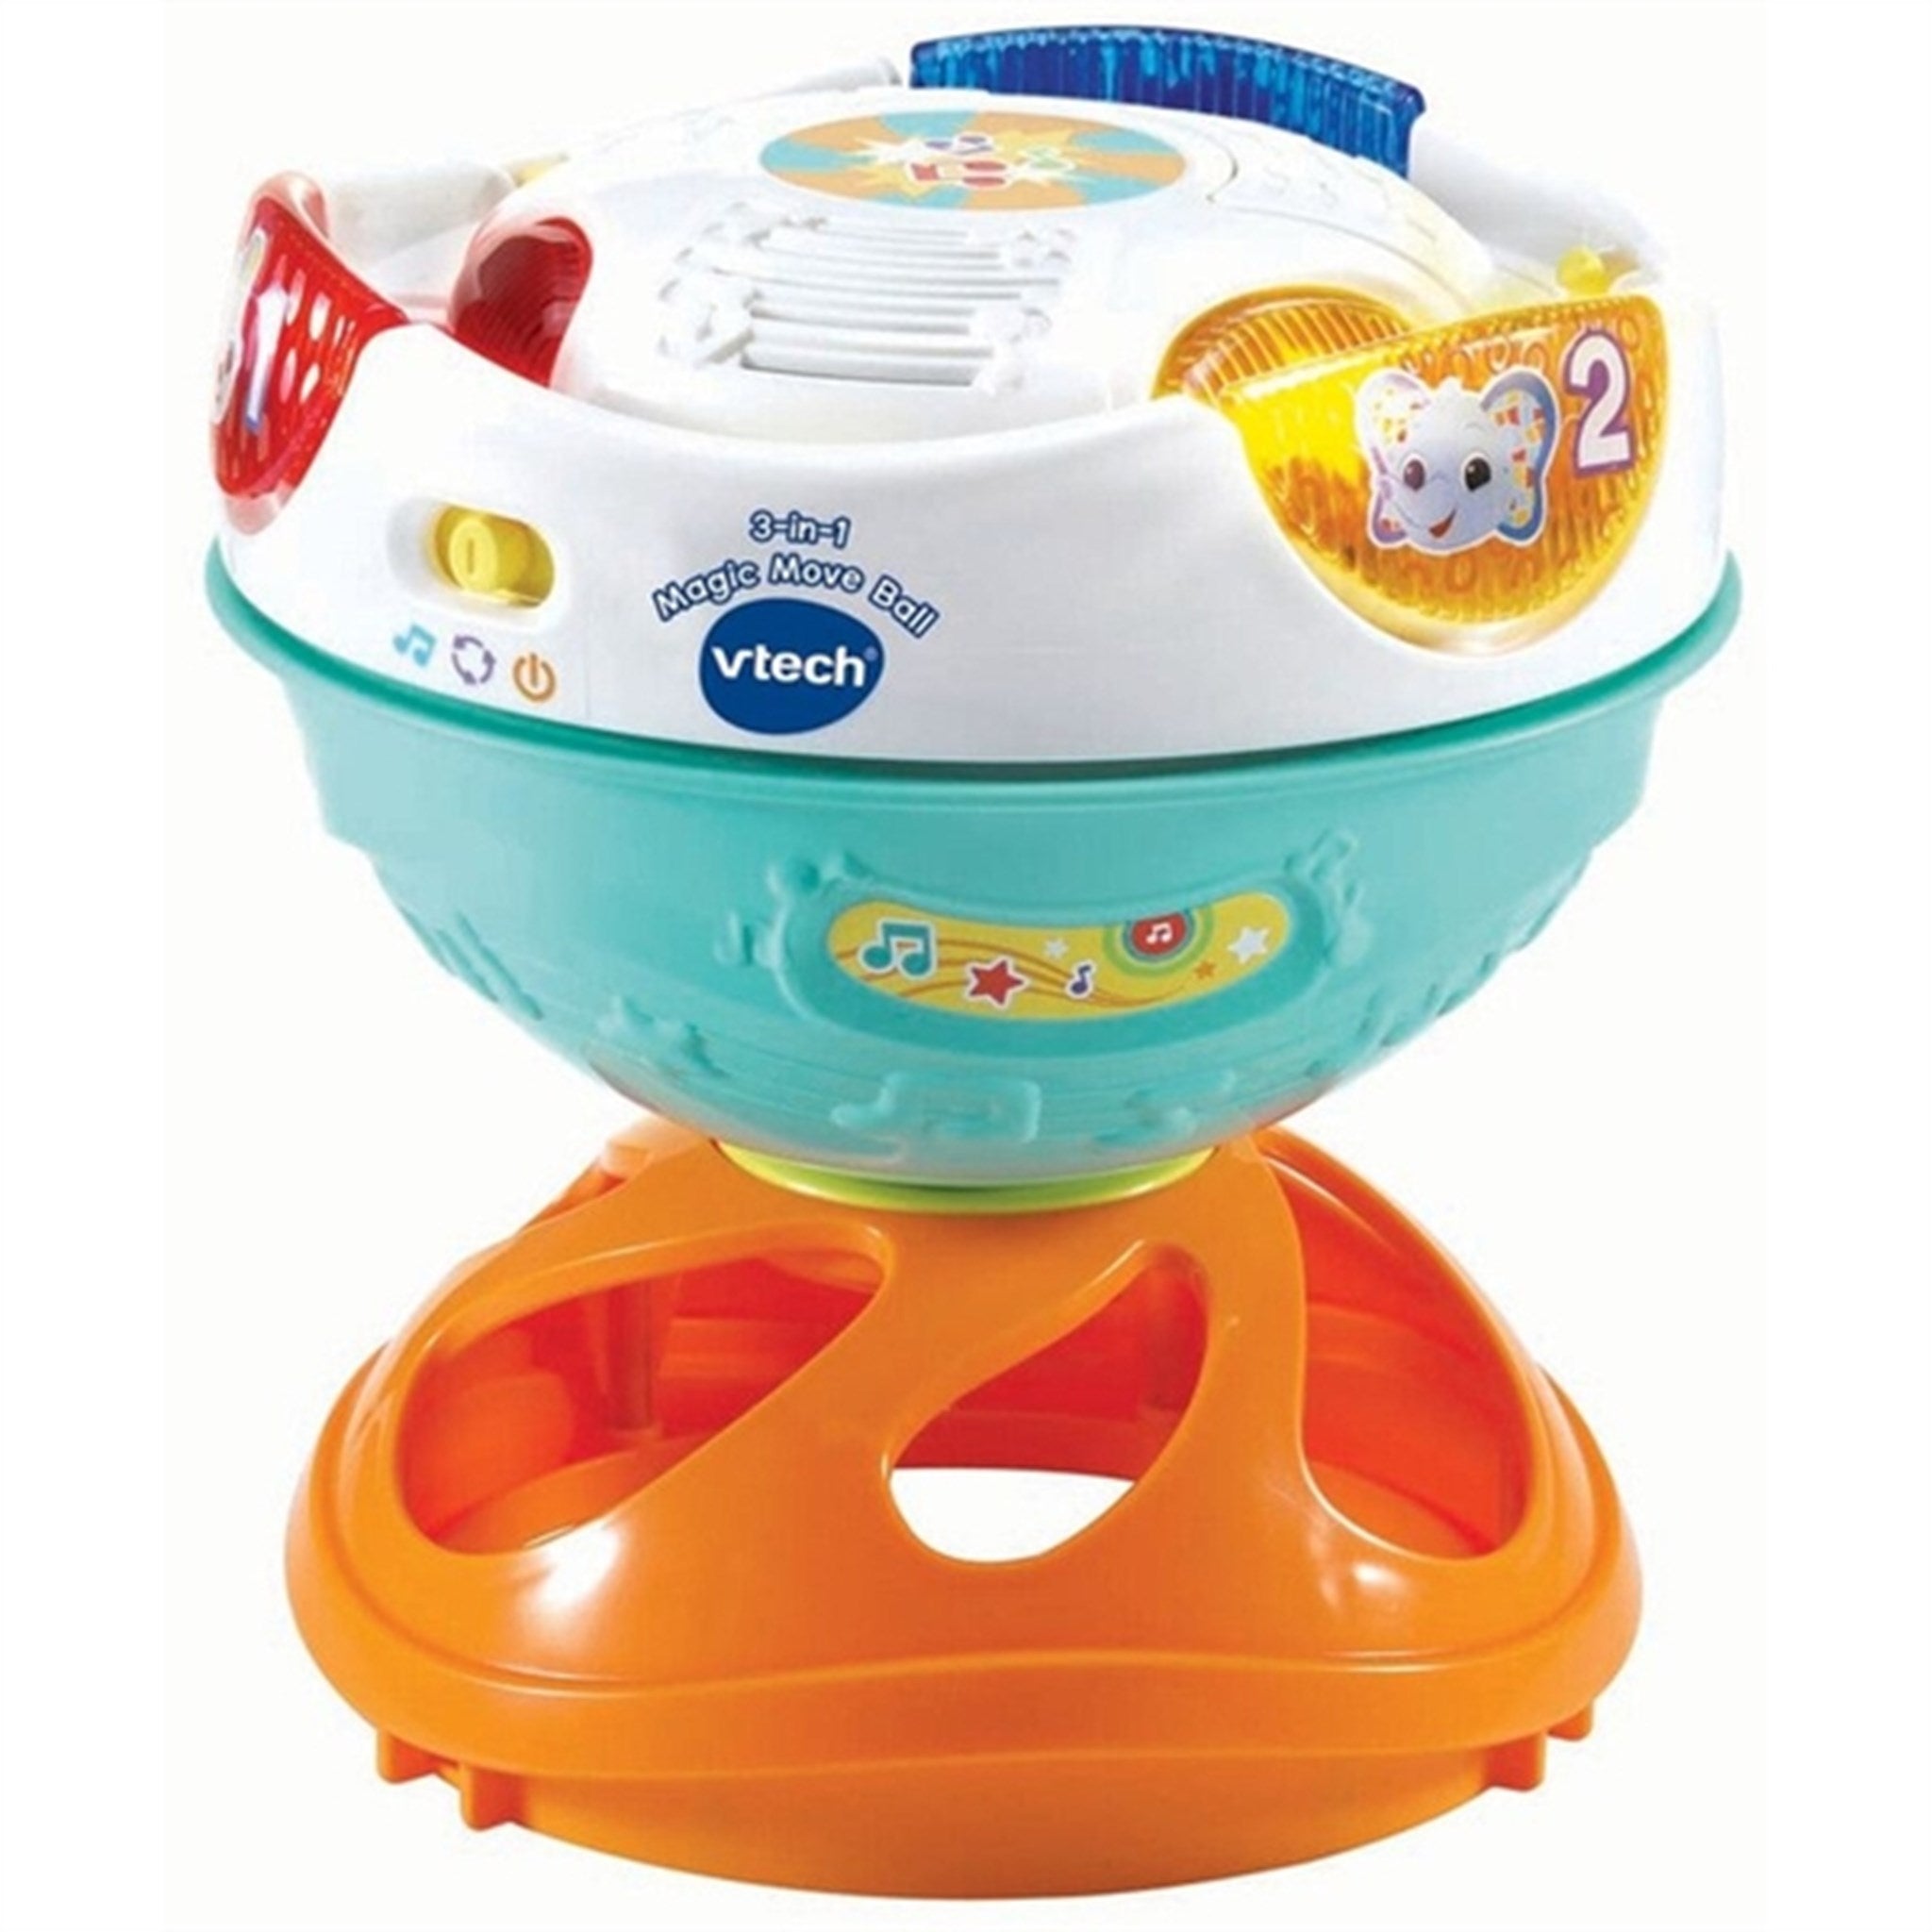 Vtech Baby 3-In-1 Magic Move Ball